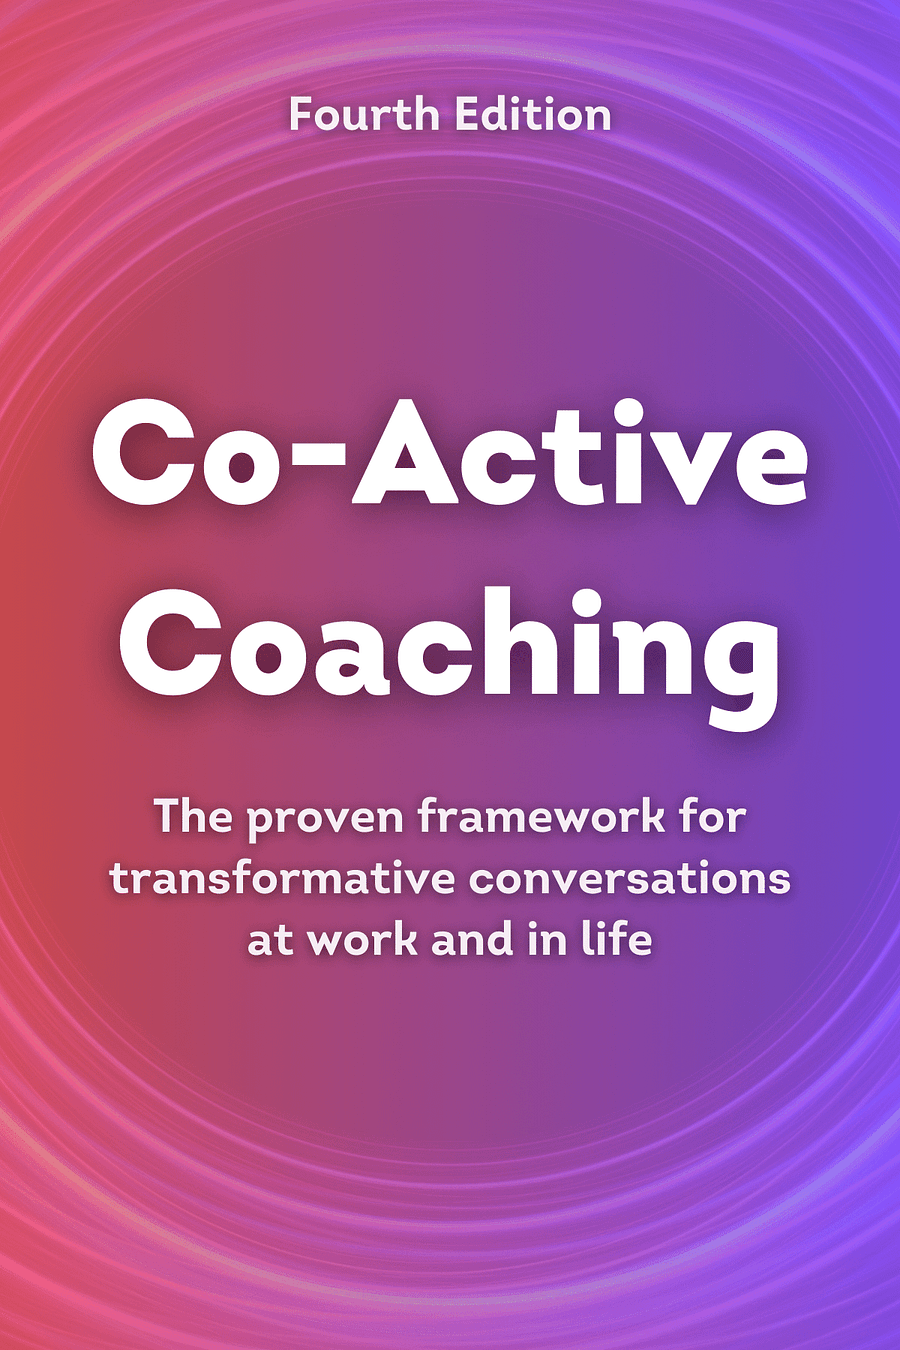 Co-Active Coaching, Fourth Edition by Henry Kimsey-House, Karen Kimsey-House, Phillip Sandhal, Laura Whitworth - Book Summary